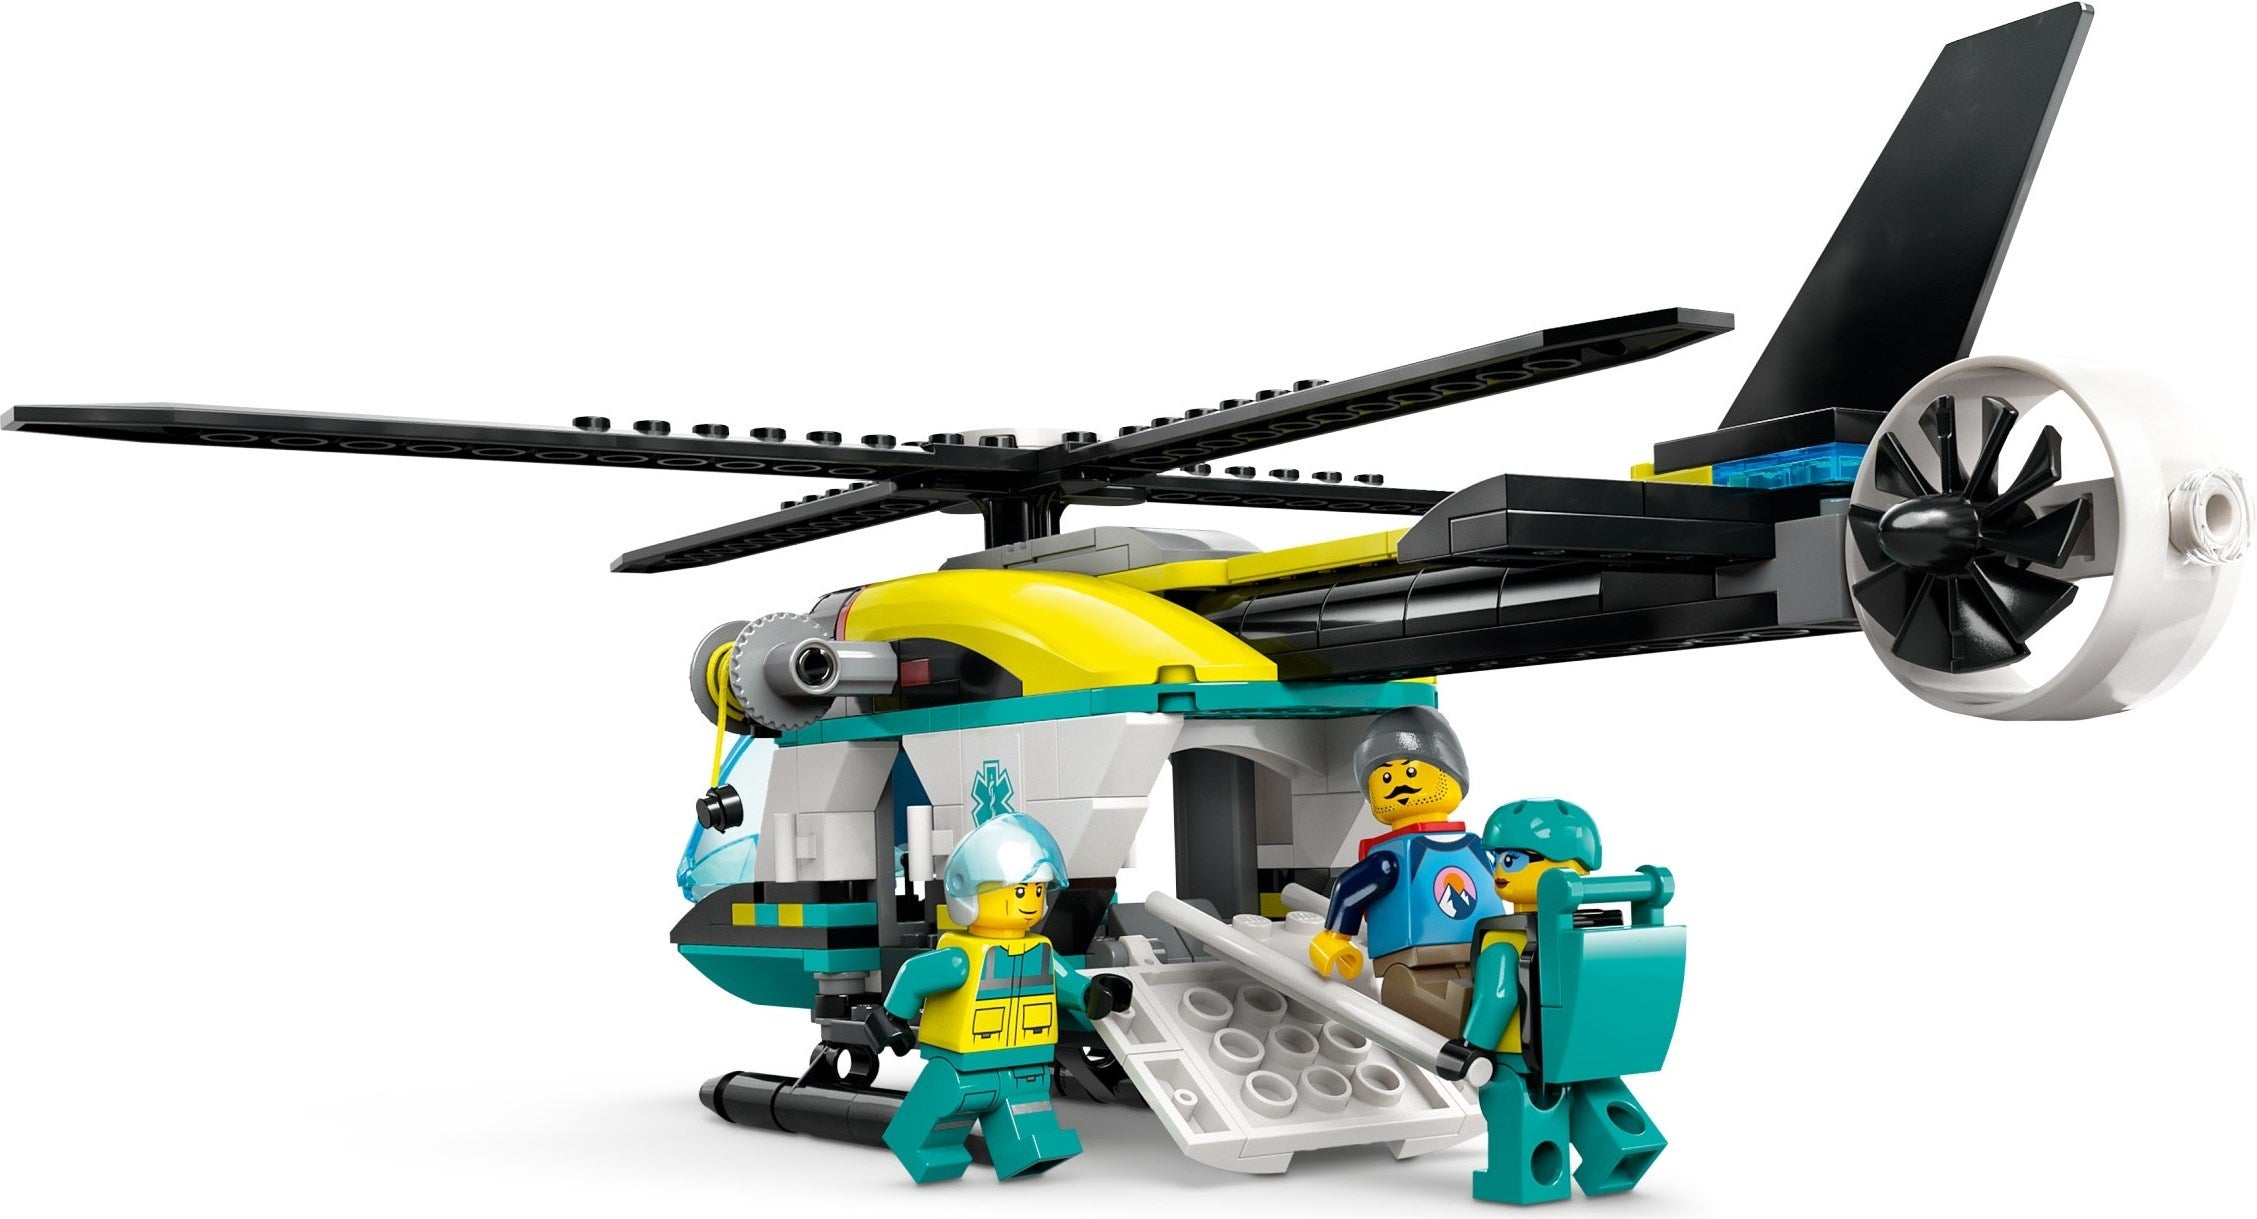 LEGO 60405 Emergency Rescue Helicopter